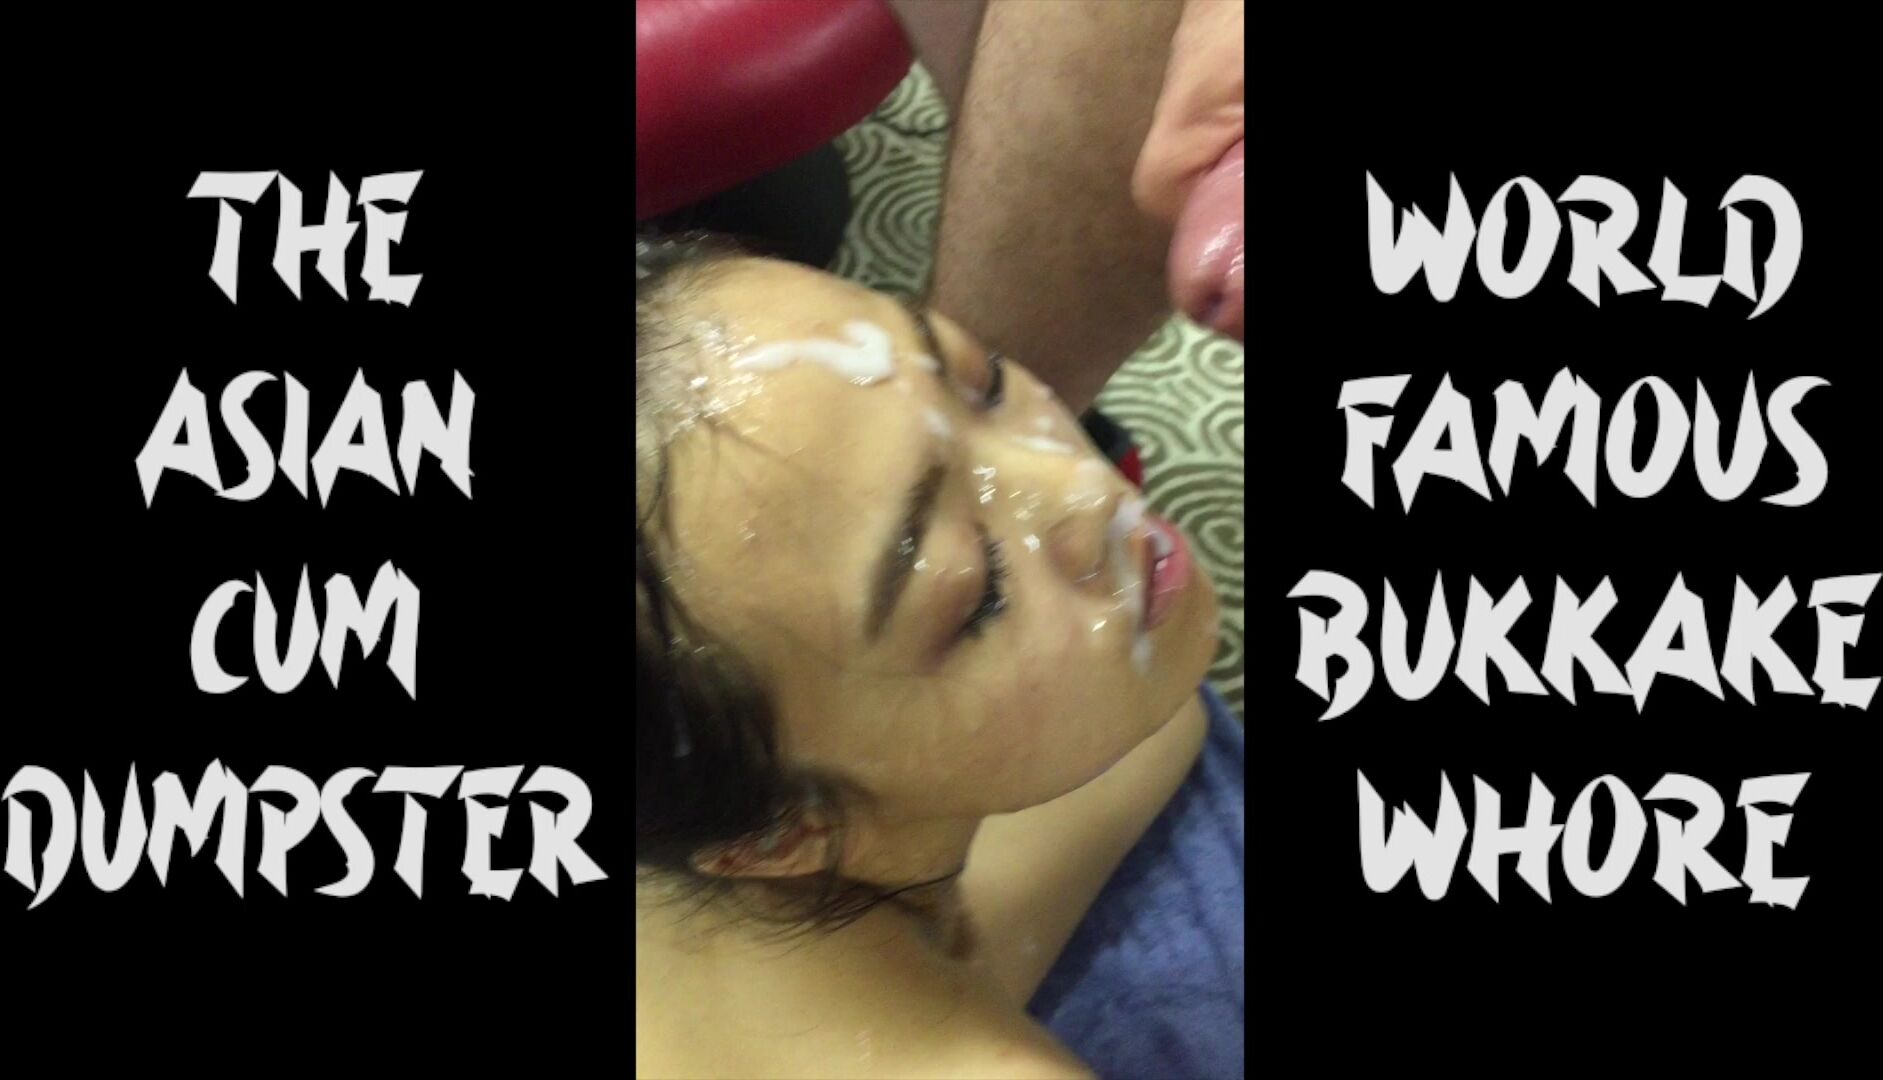 The Asian Cumdumpster - Degrading Facial for World Famous Bukkake Whore pic pic